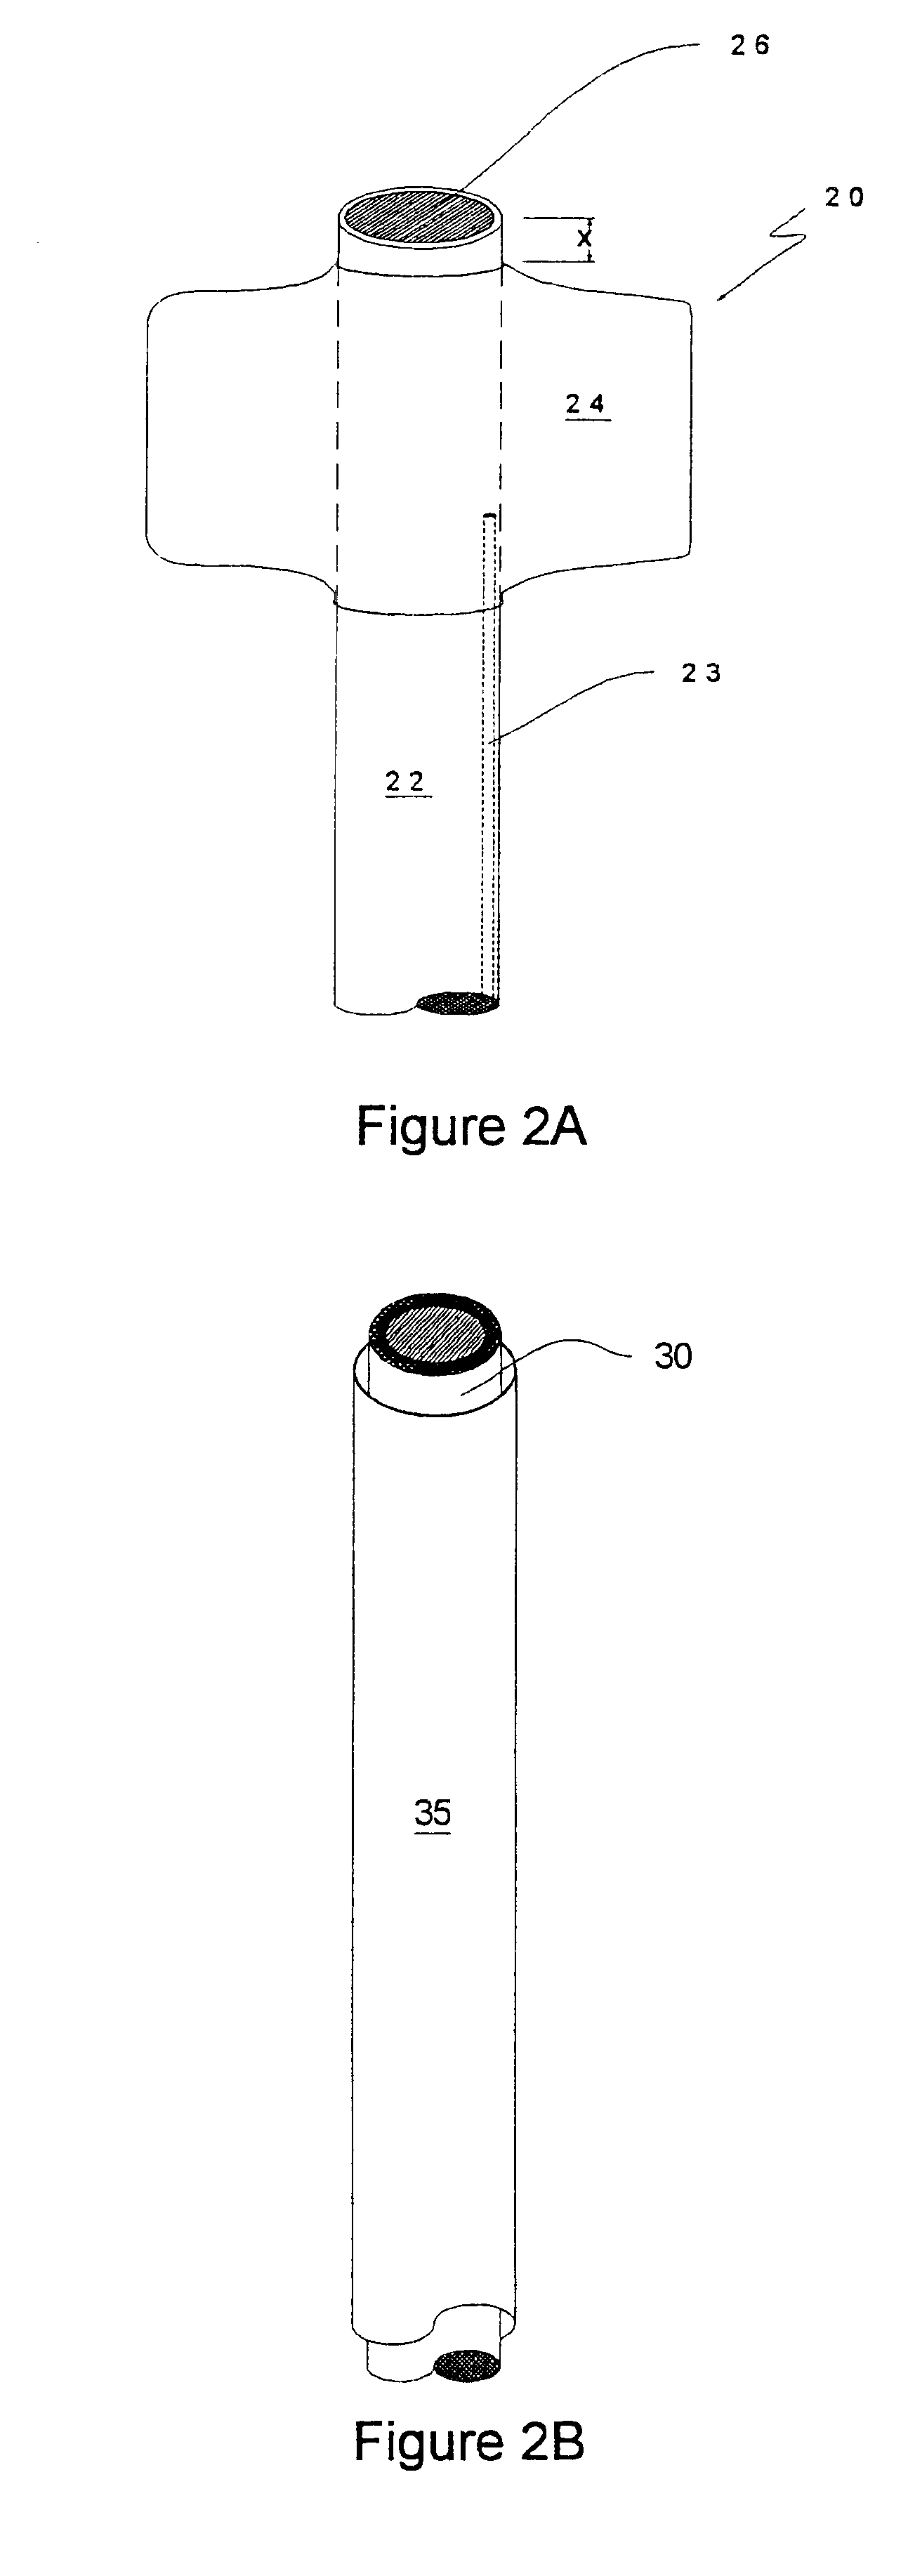 Methods for enhancing fluid flow through an obstructed vascular site, and systems and kits for use in practicing the same